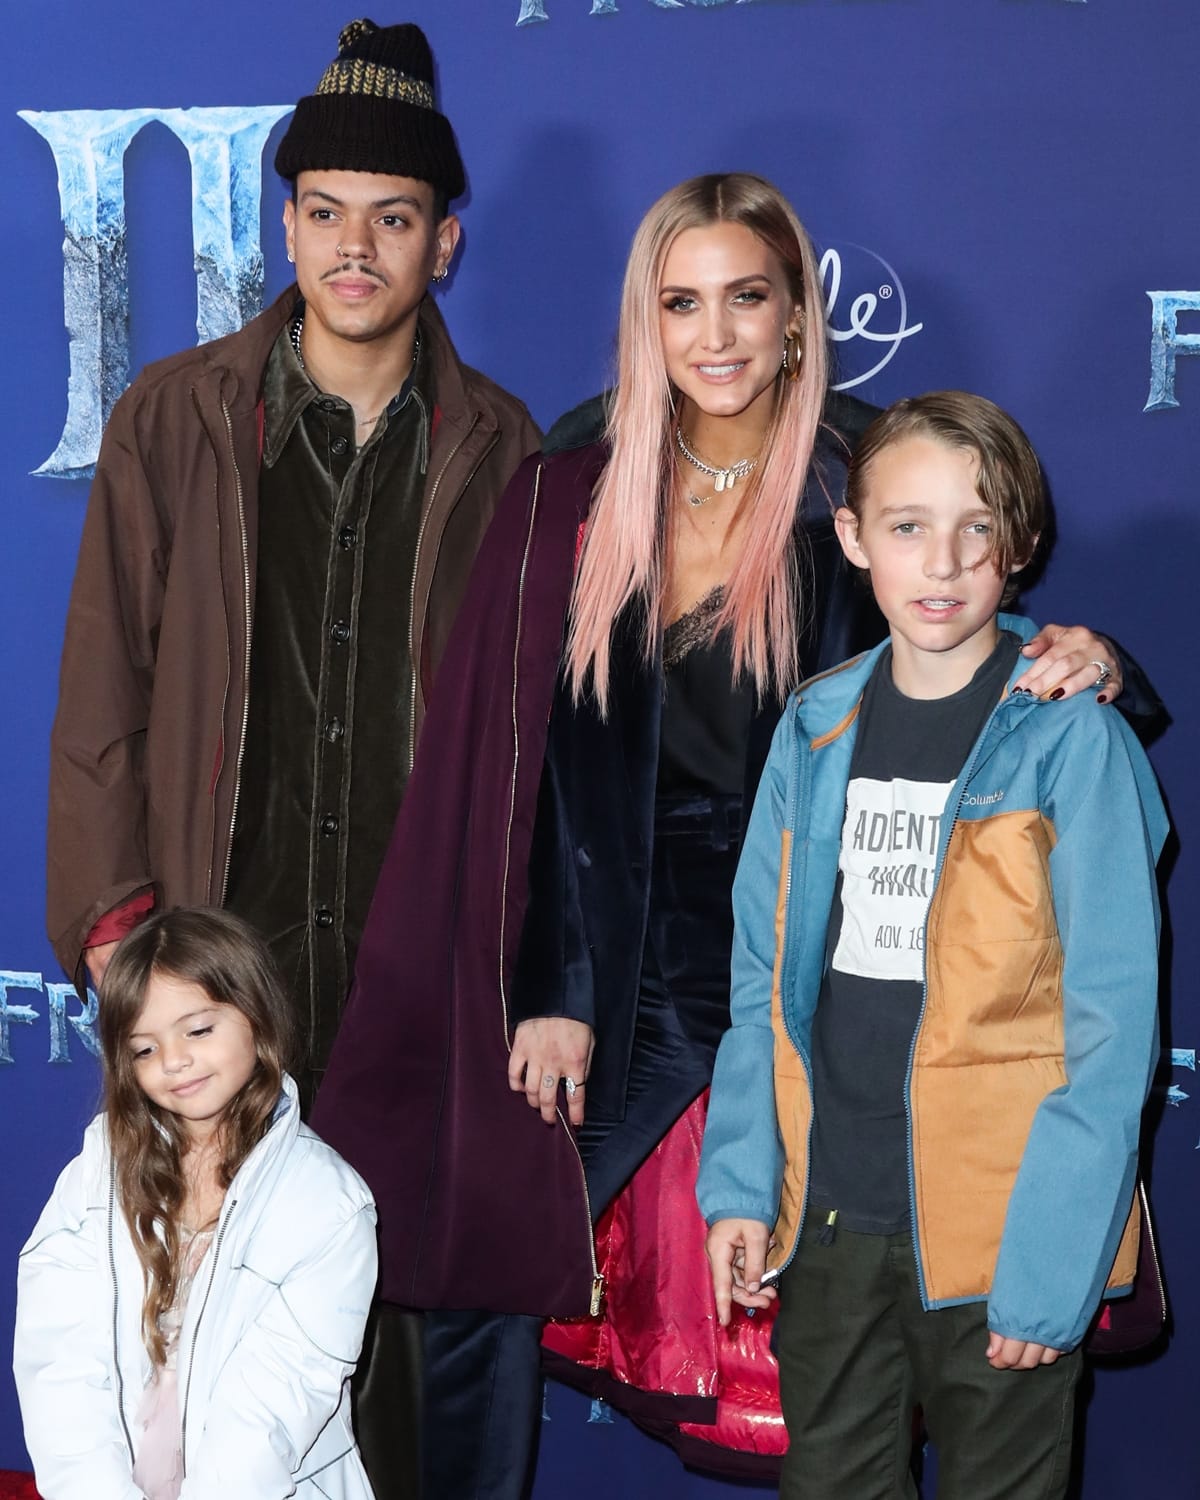 Jagger Snow Ross, Evan Ross, Ashlee Simpson, and Bronx Wentz arrive at the World Premiere Of Disney's Frozen 2